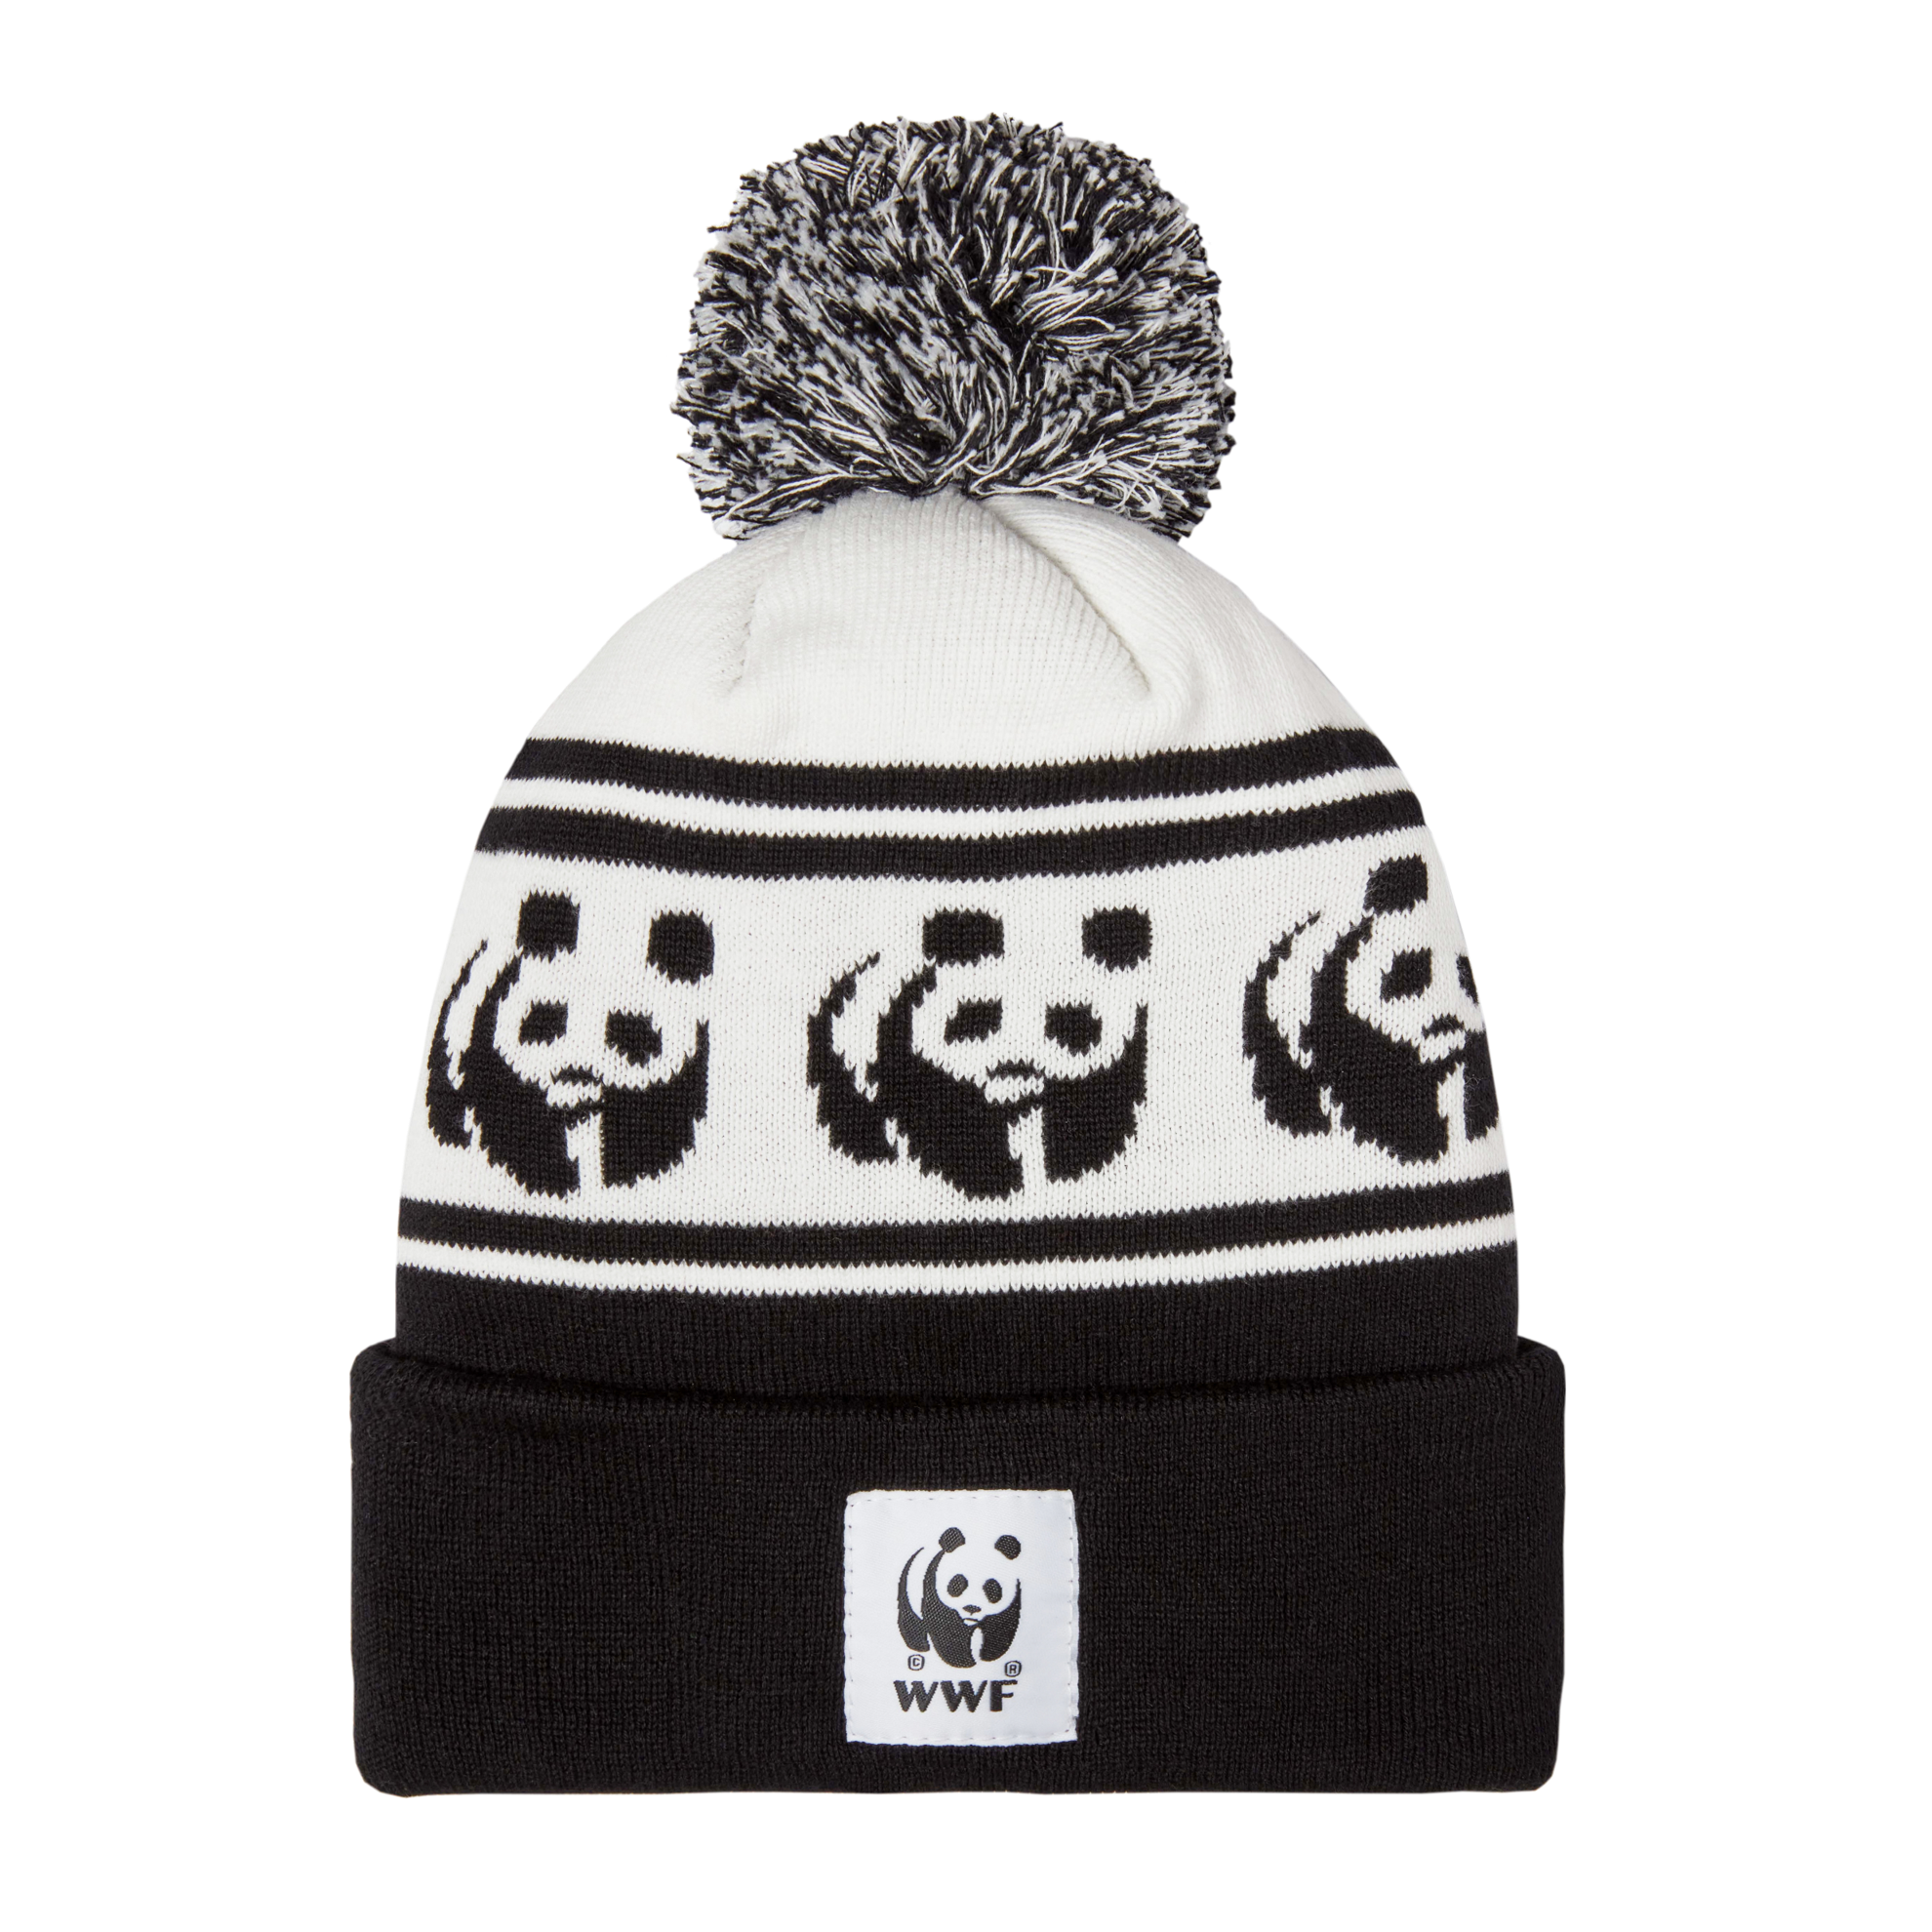 A picture of the panda toque with pom pom